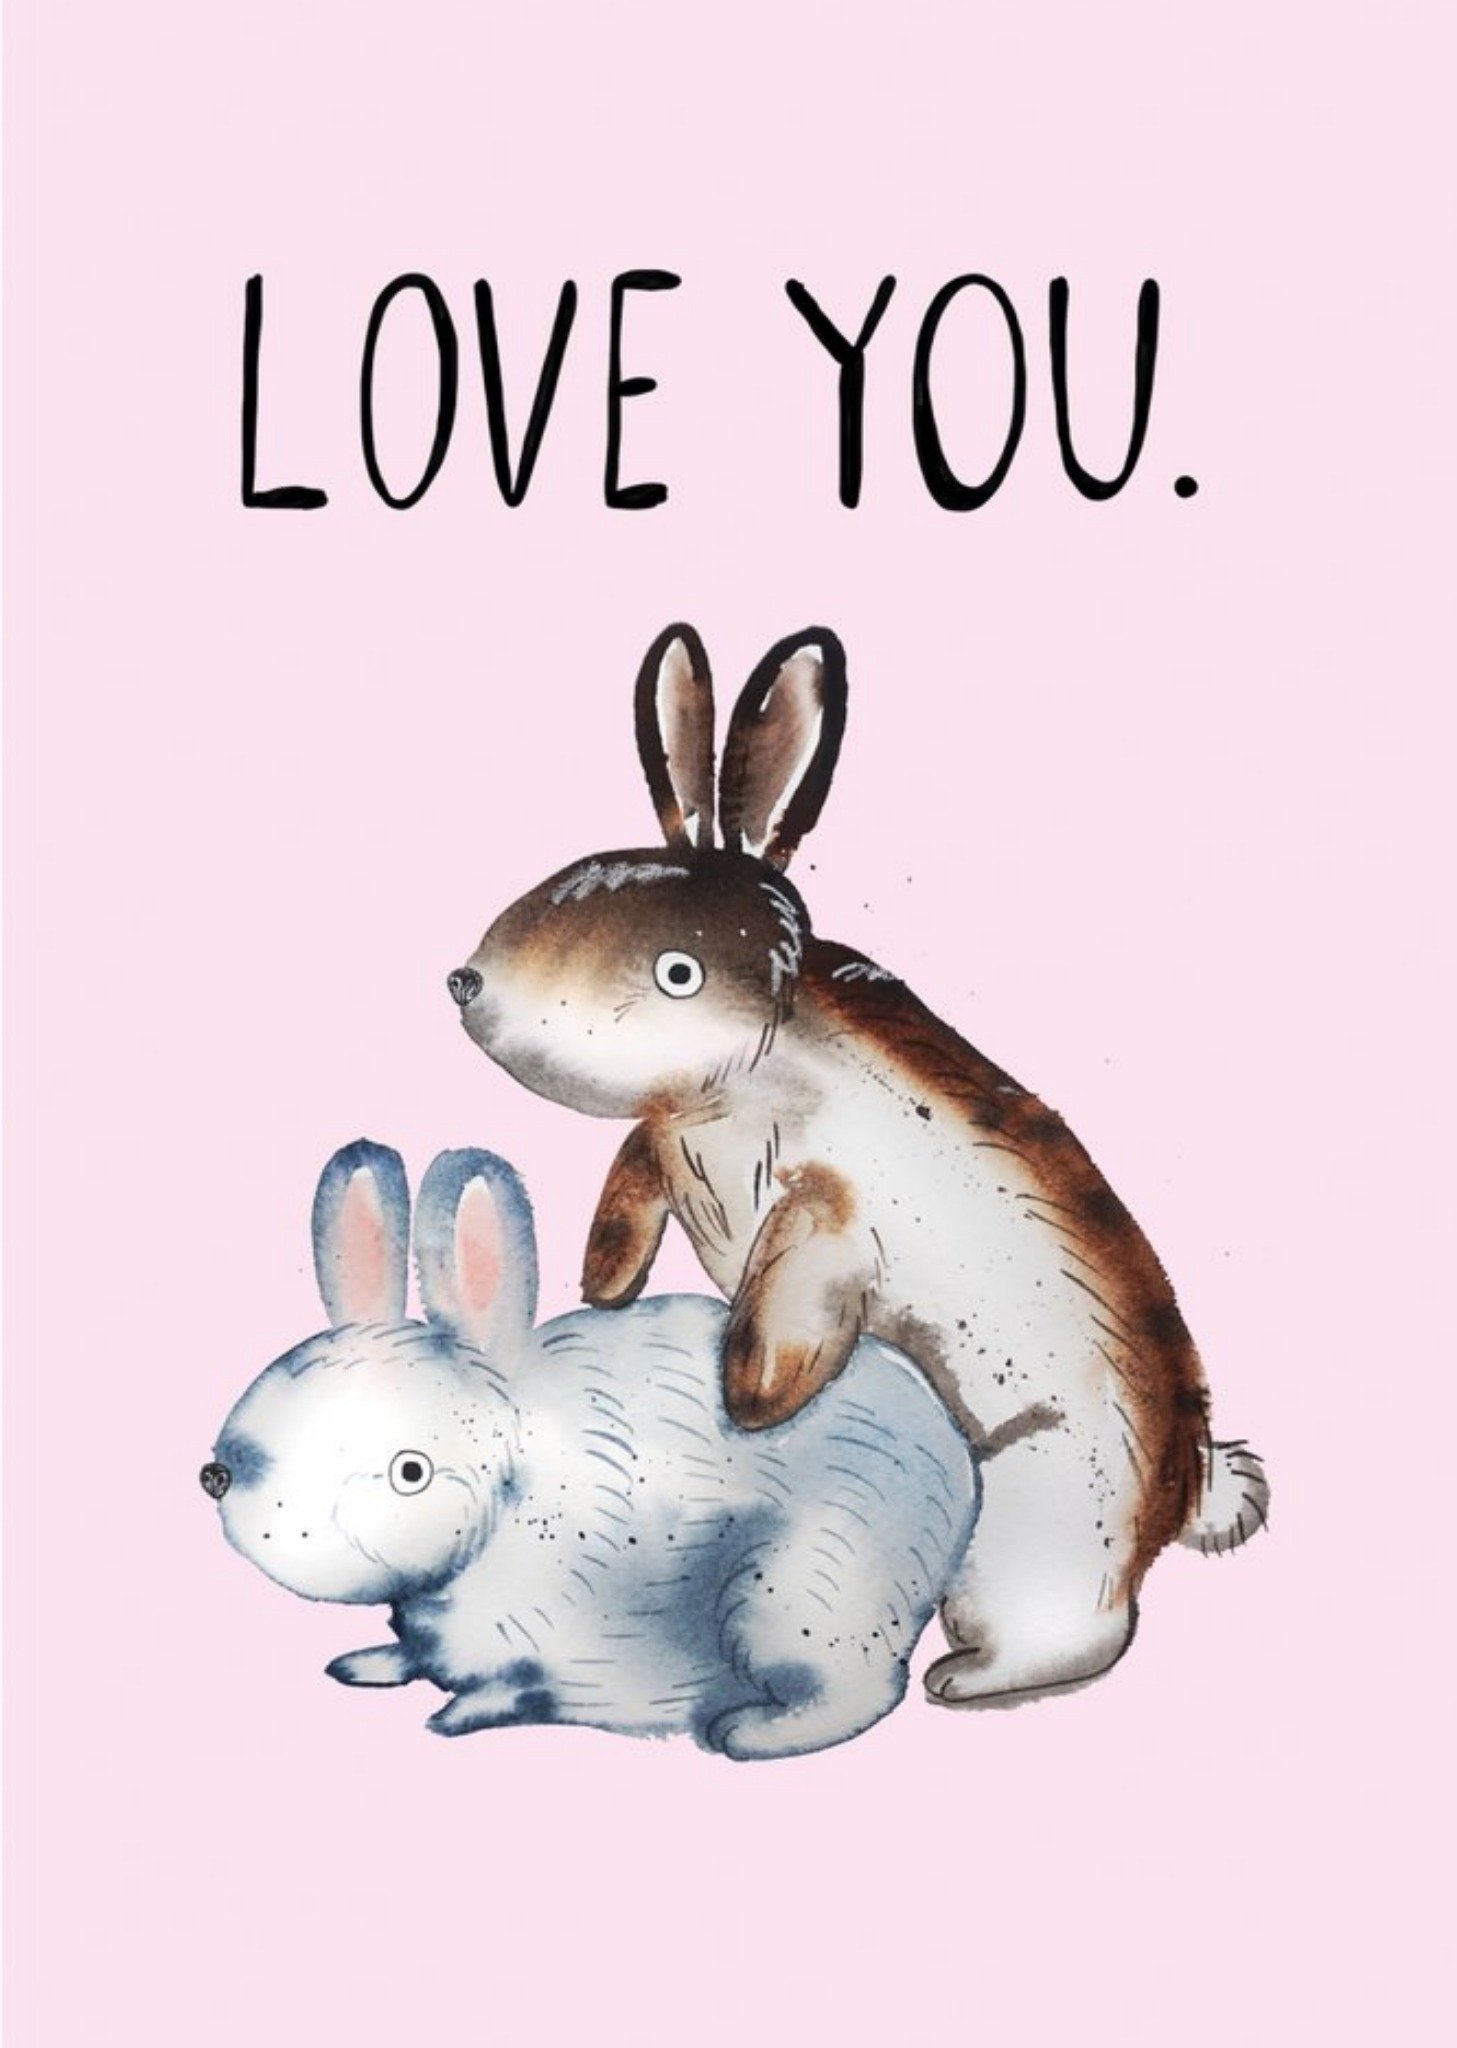 Jolly Awesome Cute Illustration Of Two Rabbits At It Like Rabbits I Love You Funny Pun Valentines Da